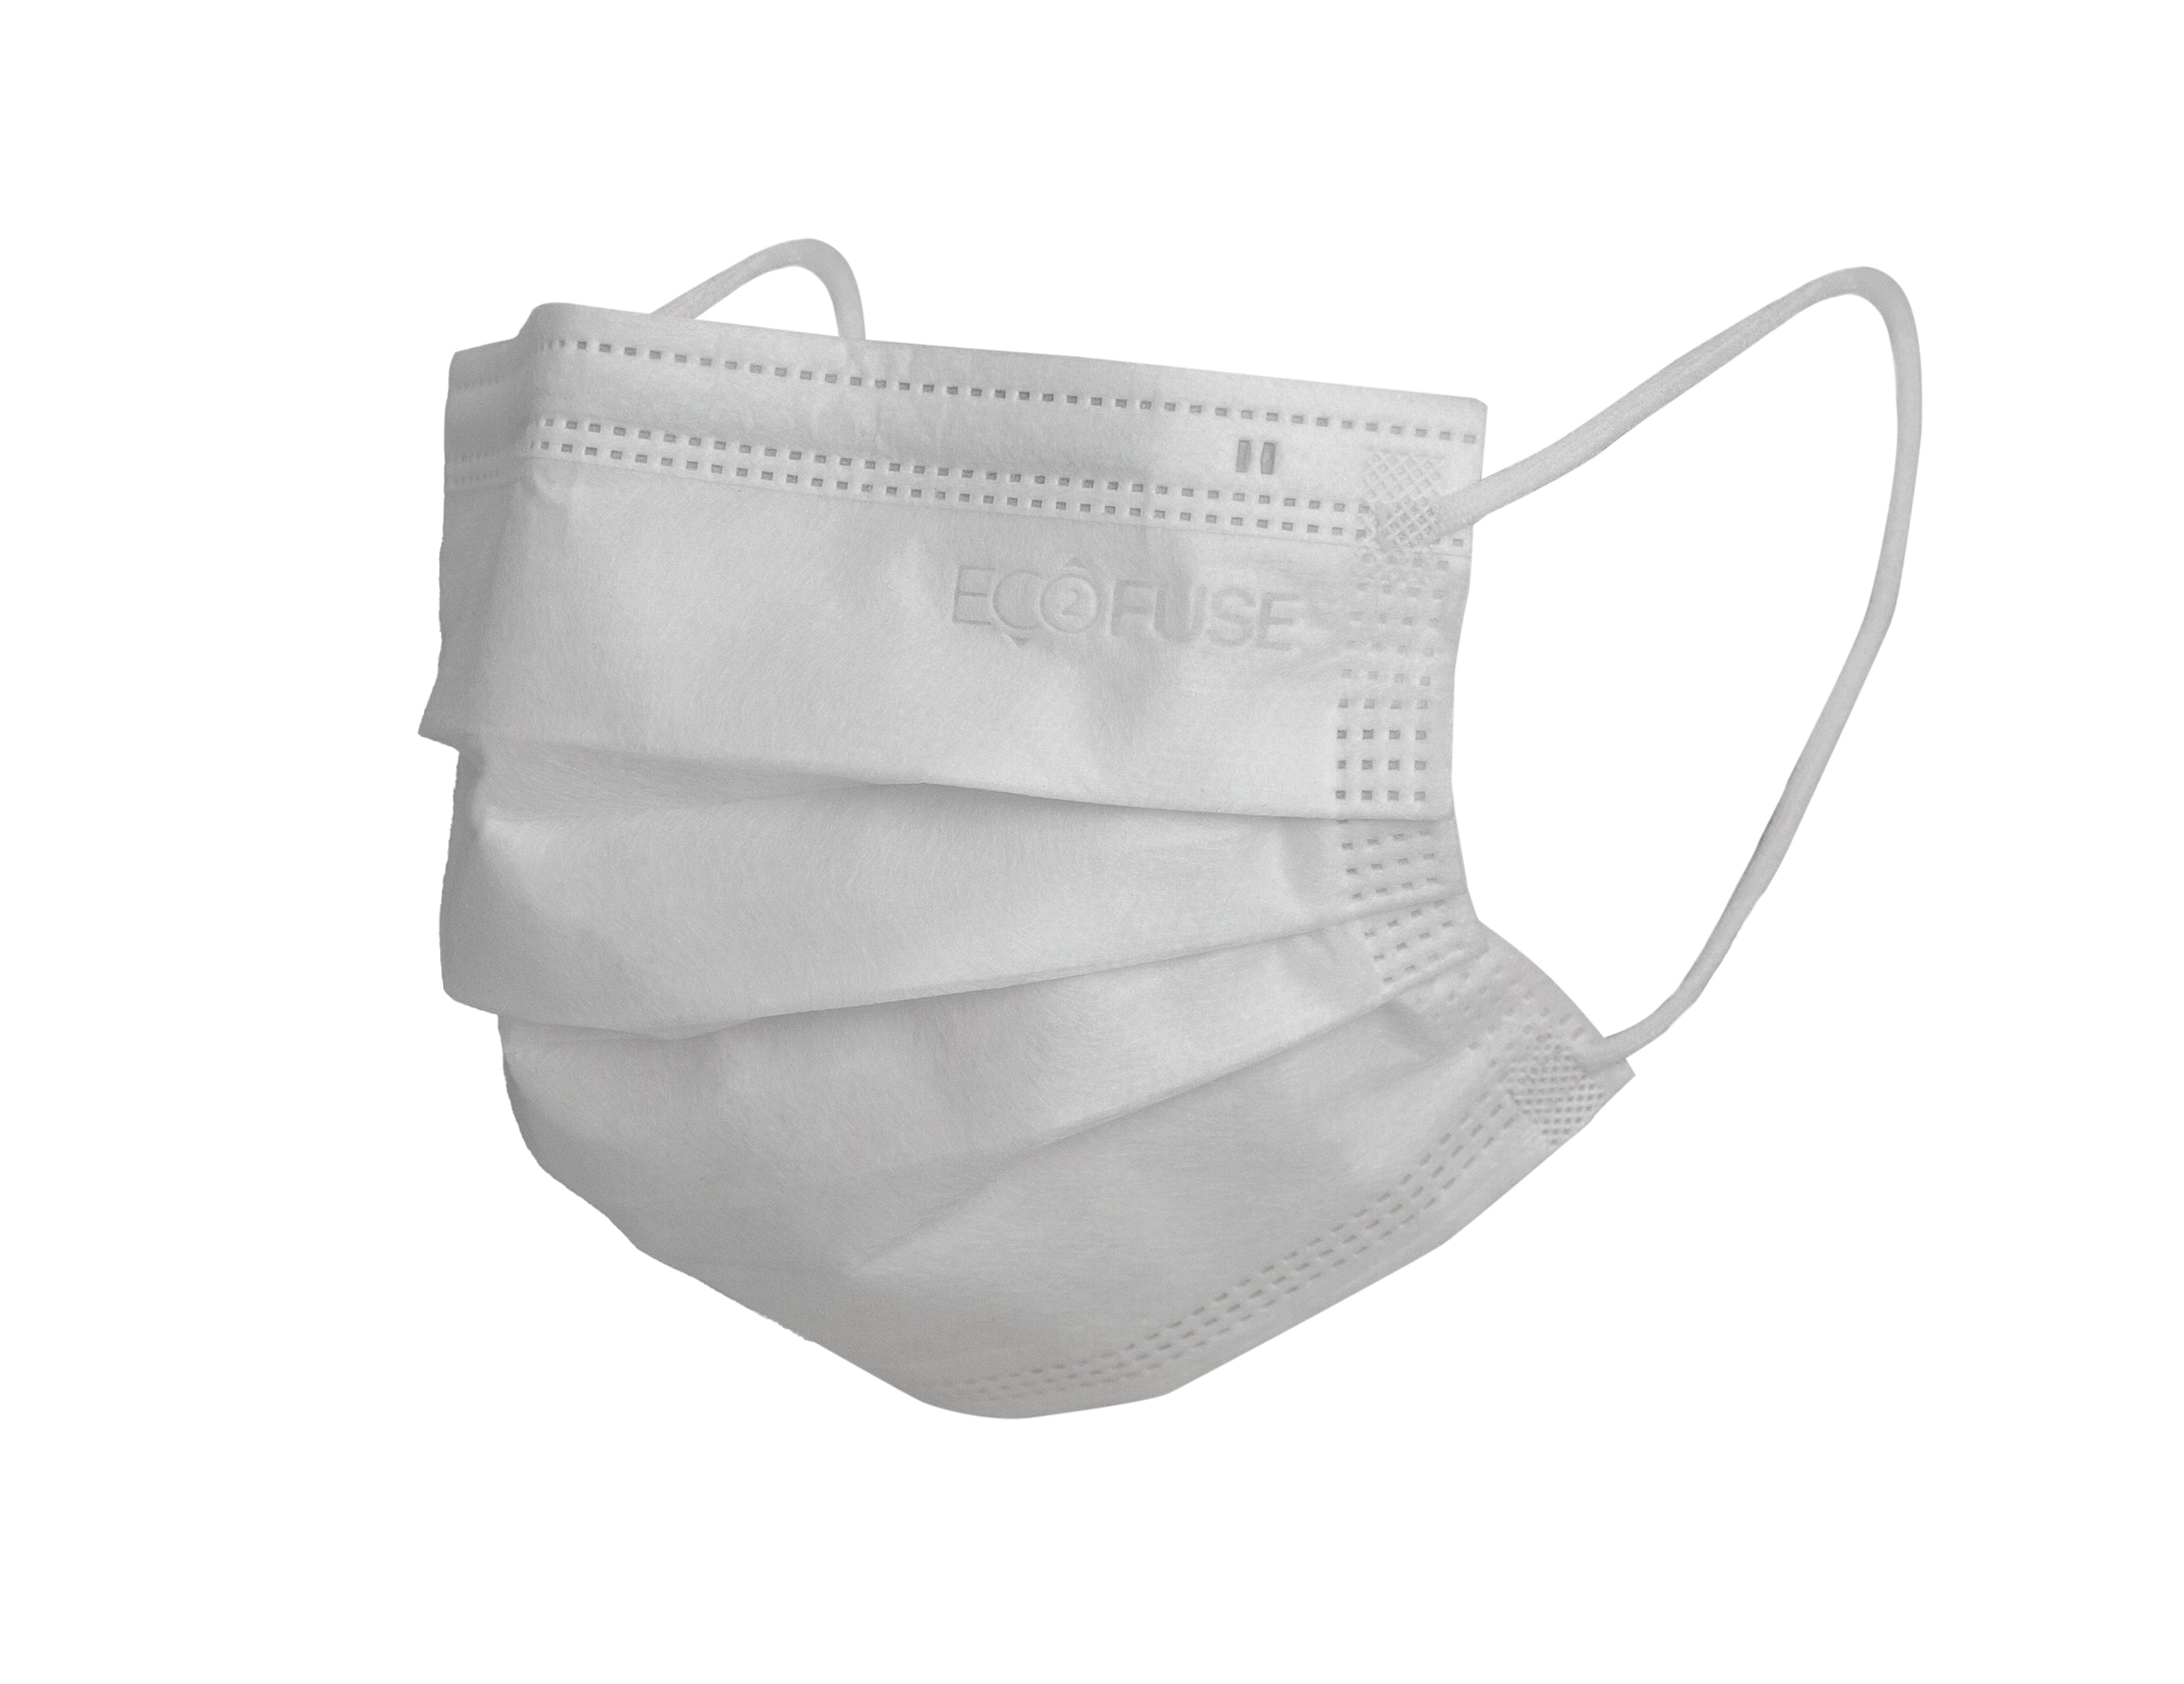 White compostable plant based mask Viraloc ecofuse ASTM level 3 made in Canada Strong